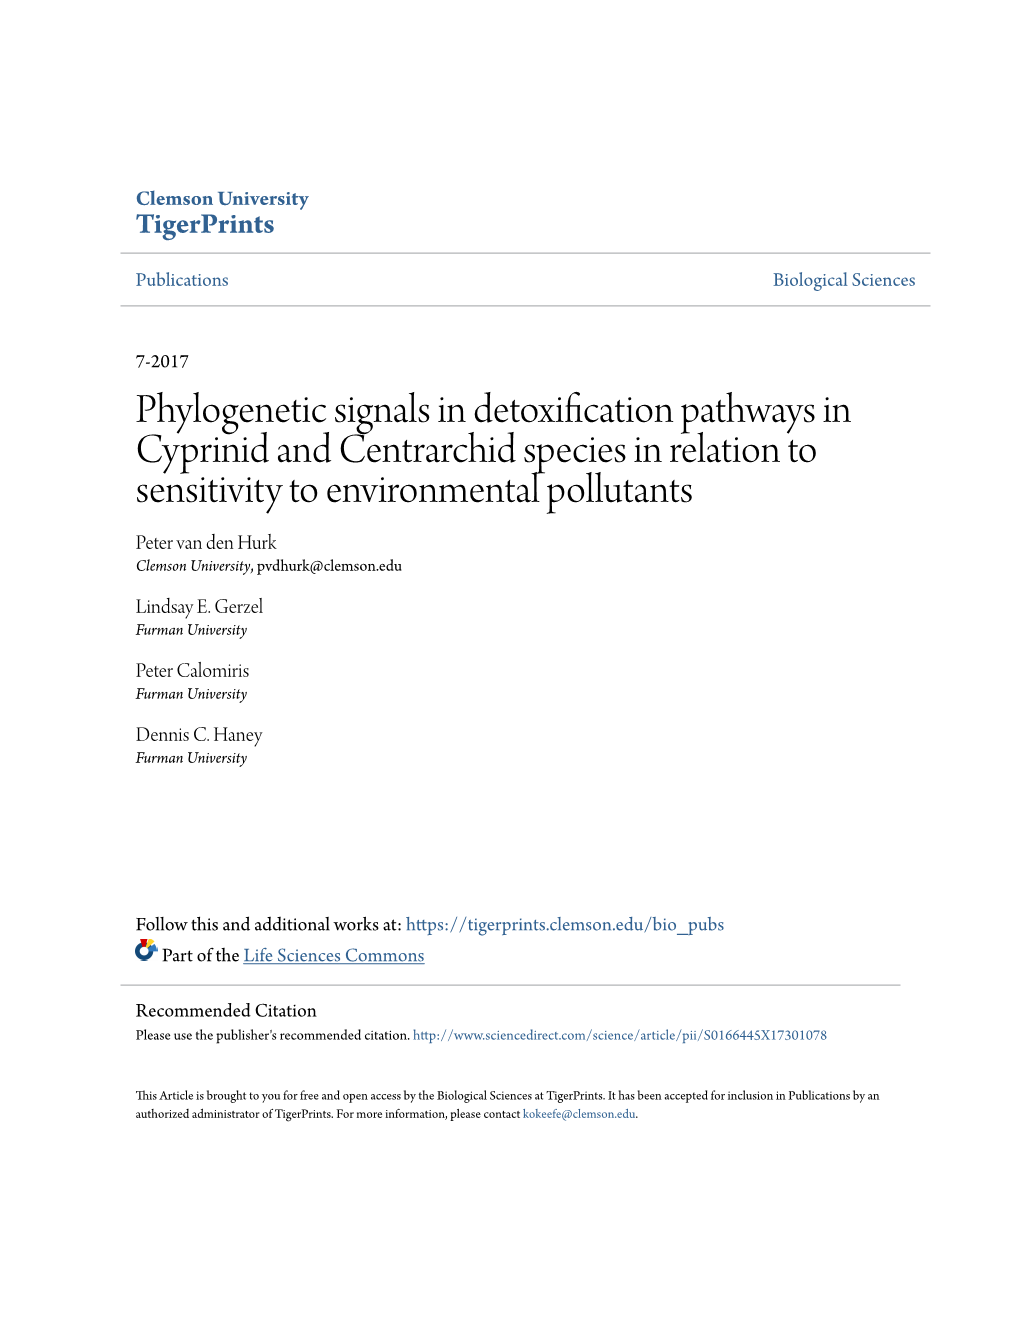 Phylogenetic Signals in Detoxification Pathways in Cyprinid And